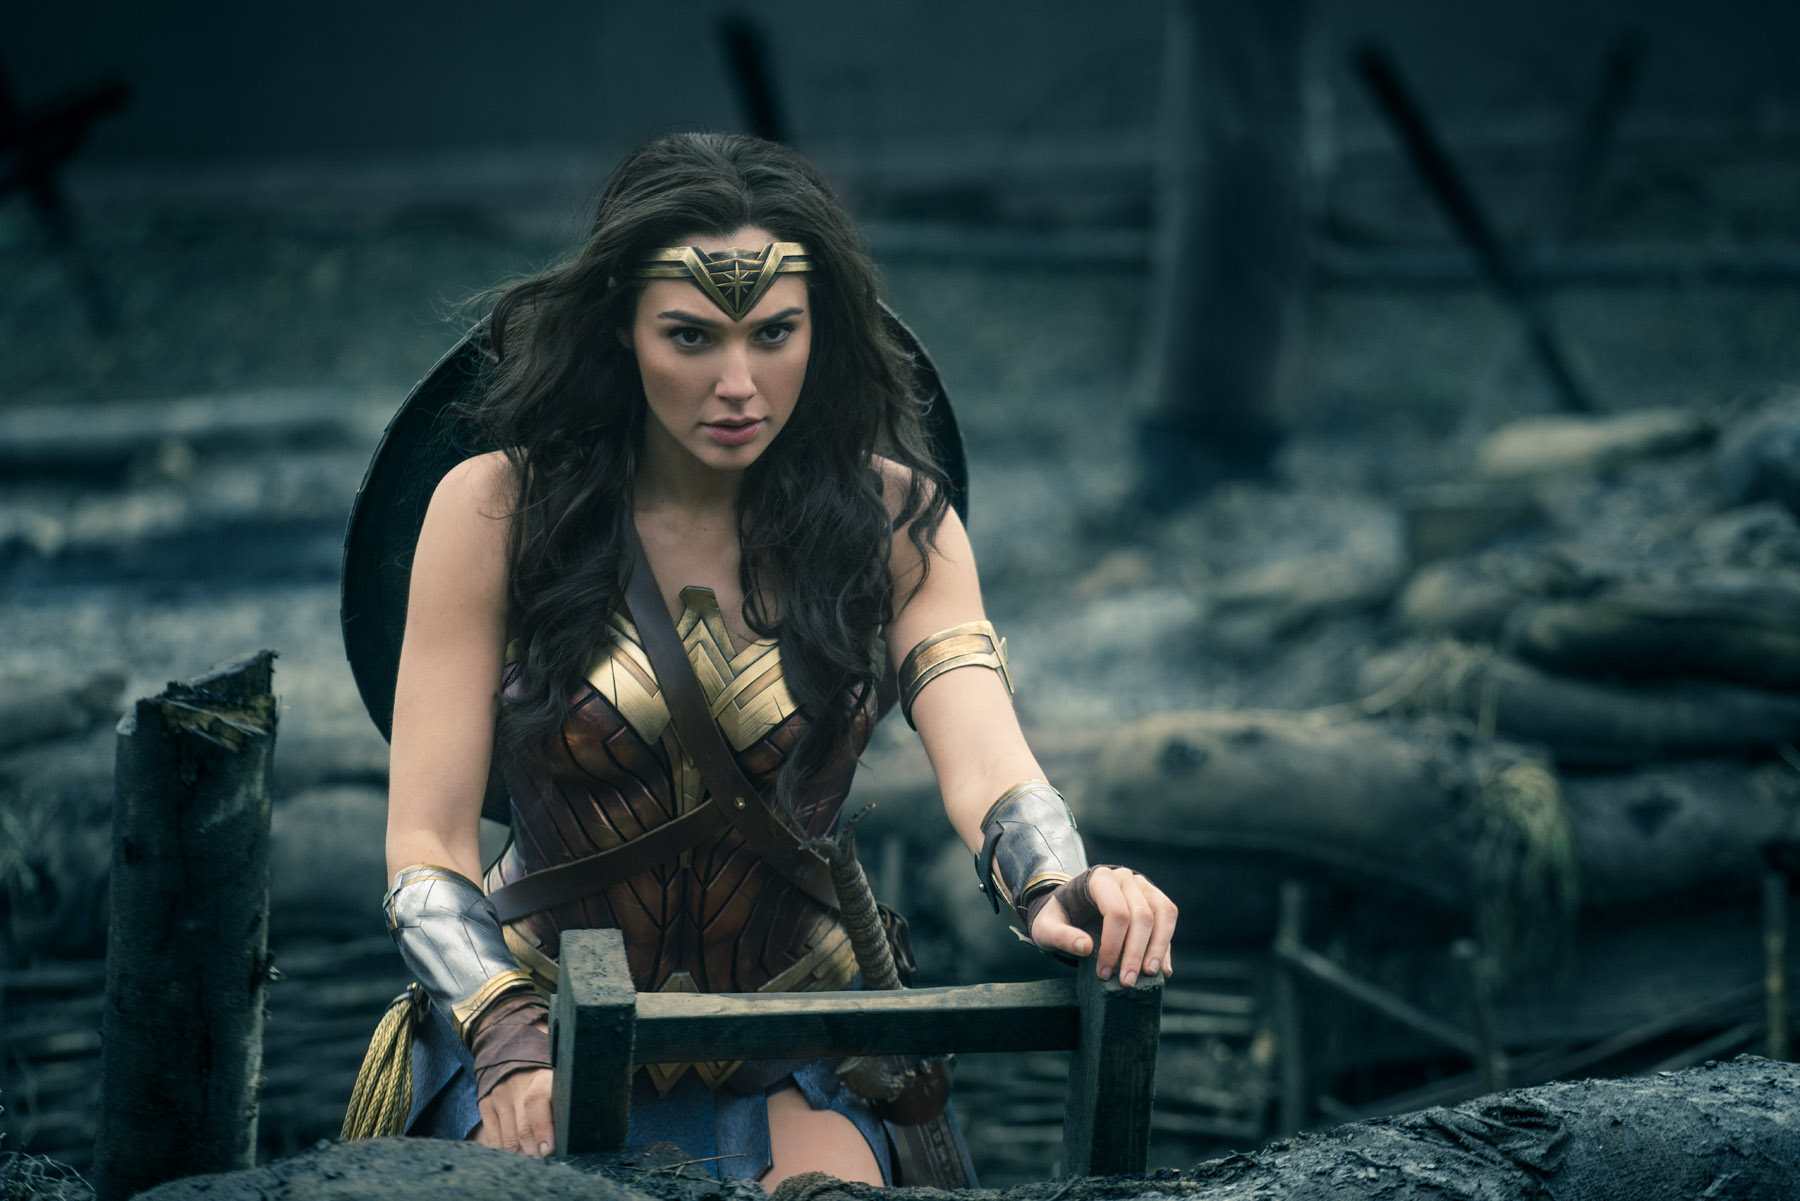 Metic: Reviewing The Guardian's Wonder Woman Review